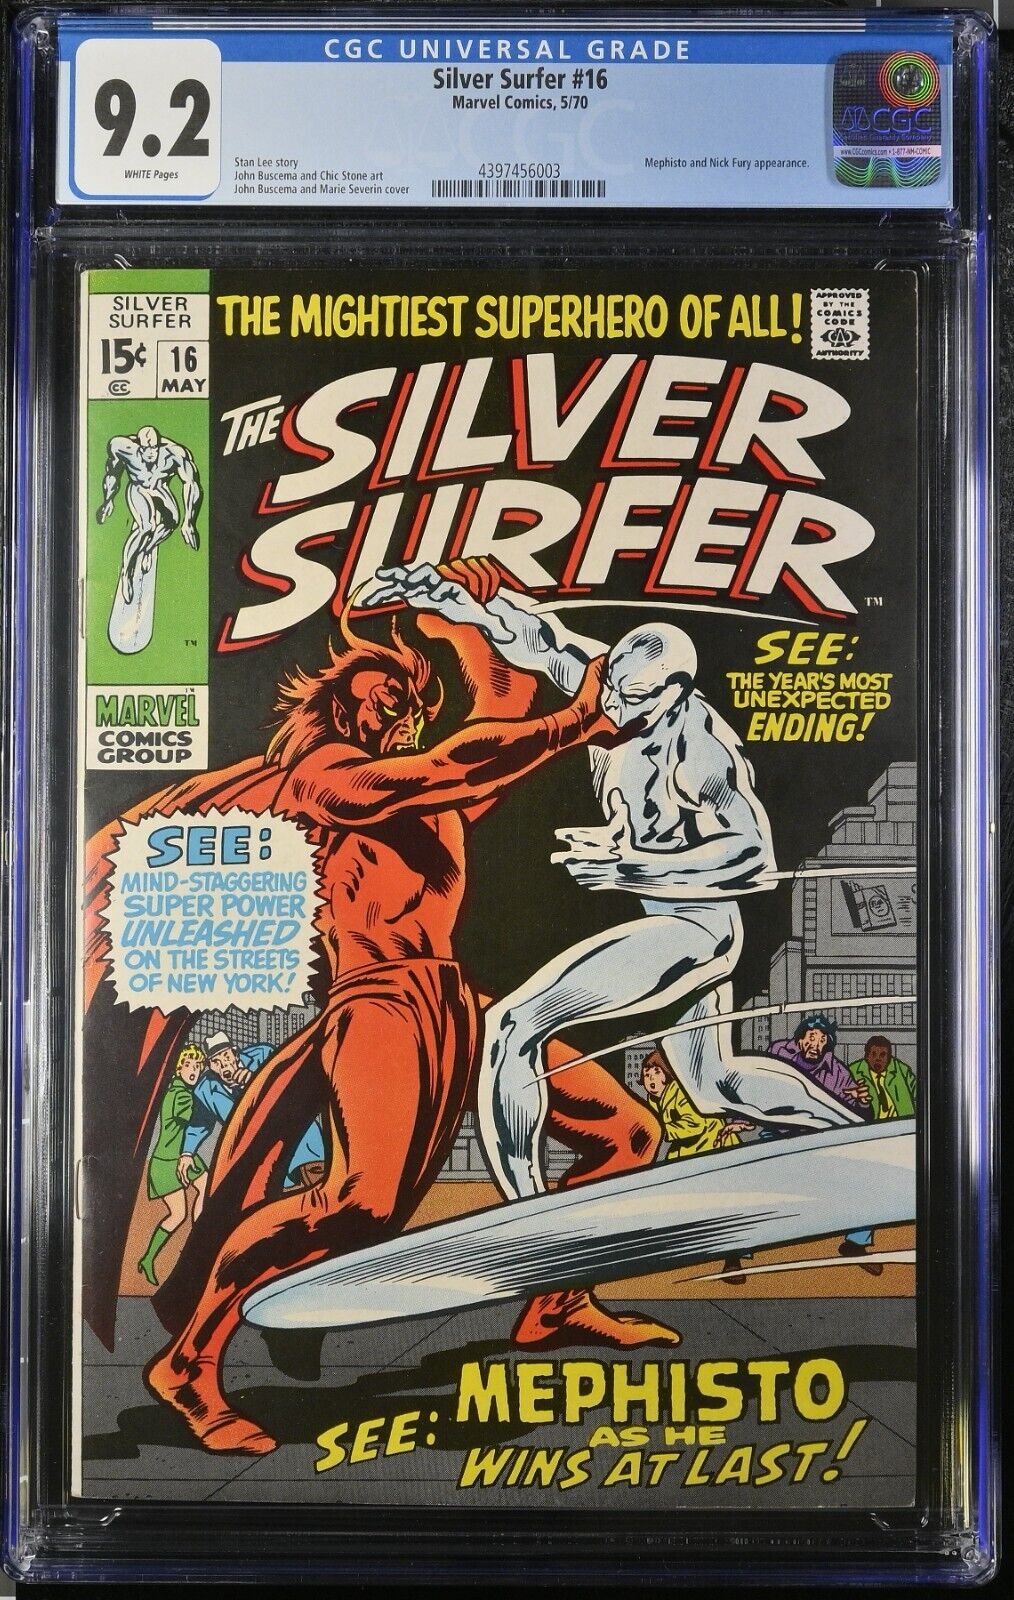 SILVER SURFER #16 (1970) CGC 9.2 WHITE MEPHISTO APPEARANCE MARVEL COMICS